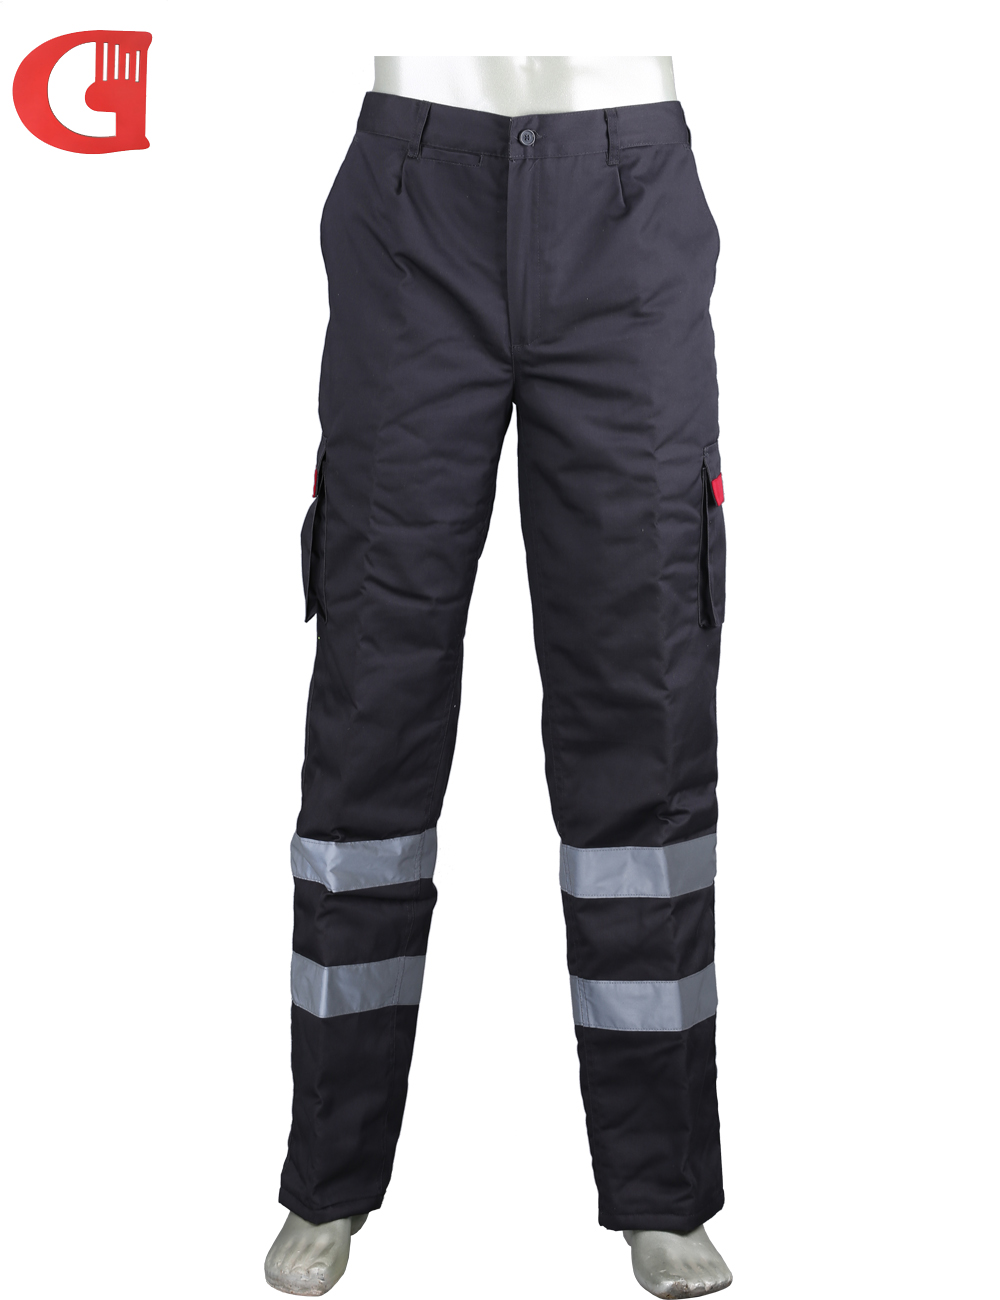 Hi Vis Safety Work trousers Factory Outlet Work Pants with tape